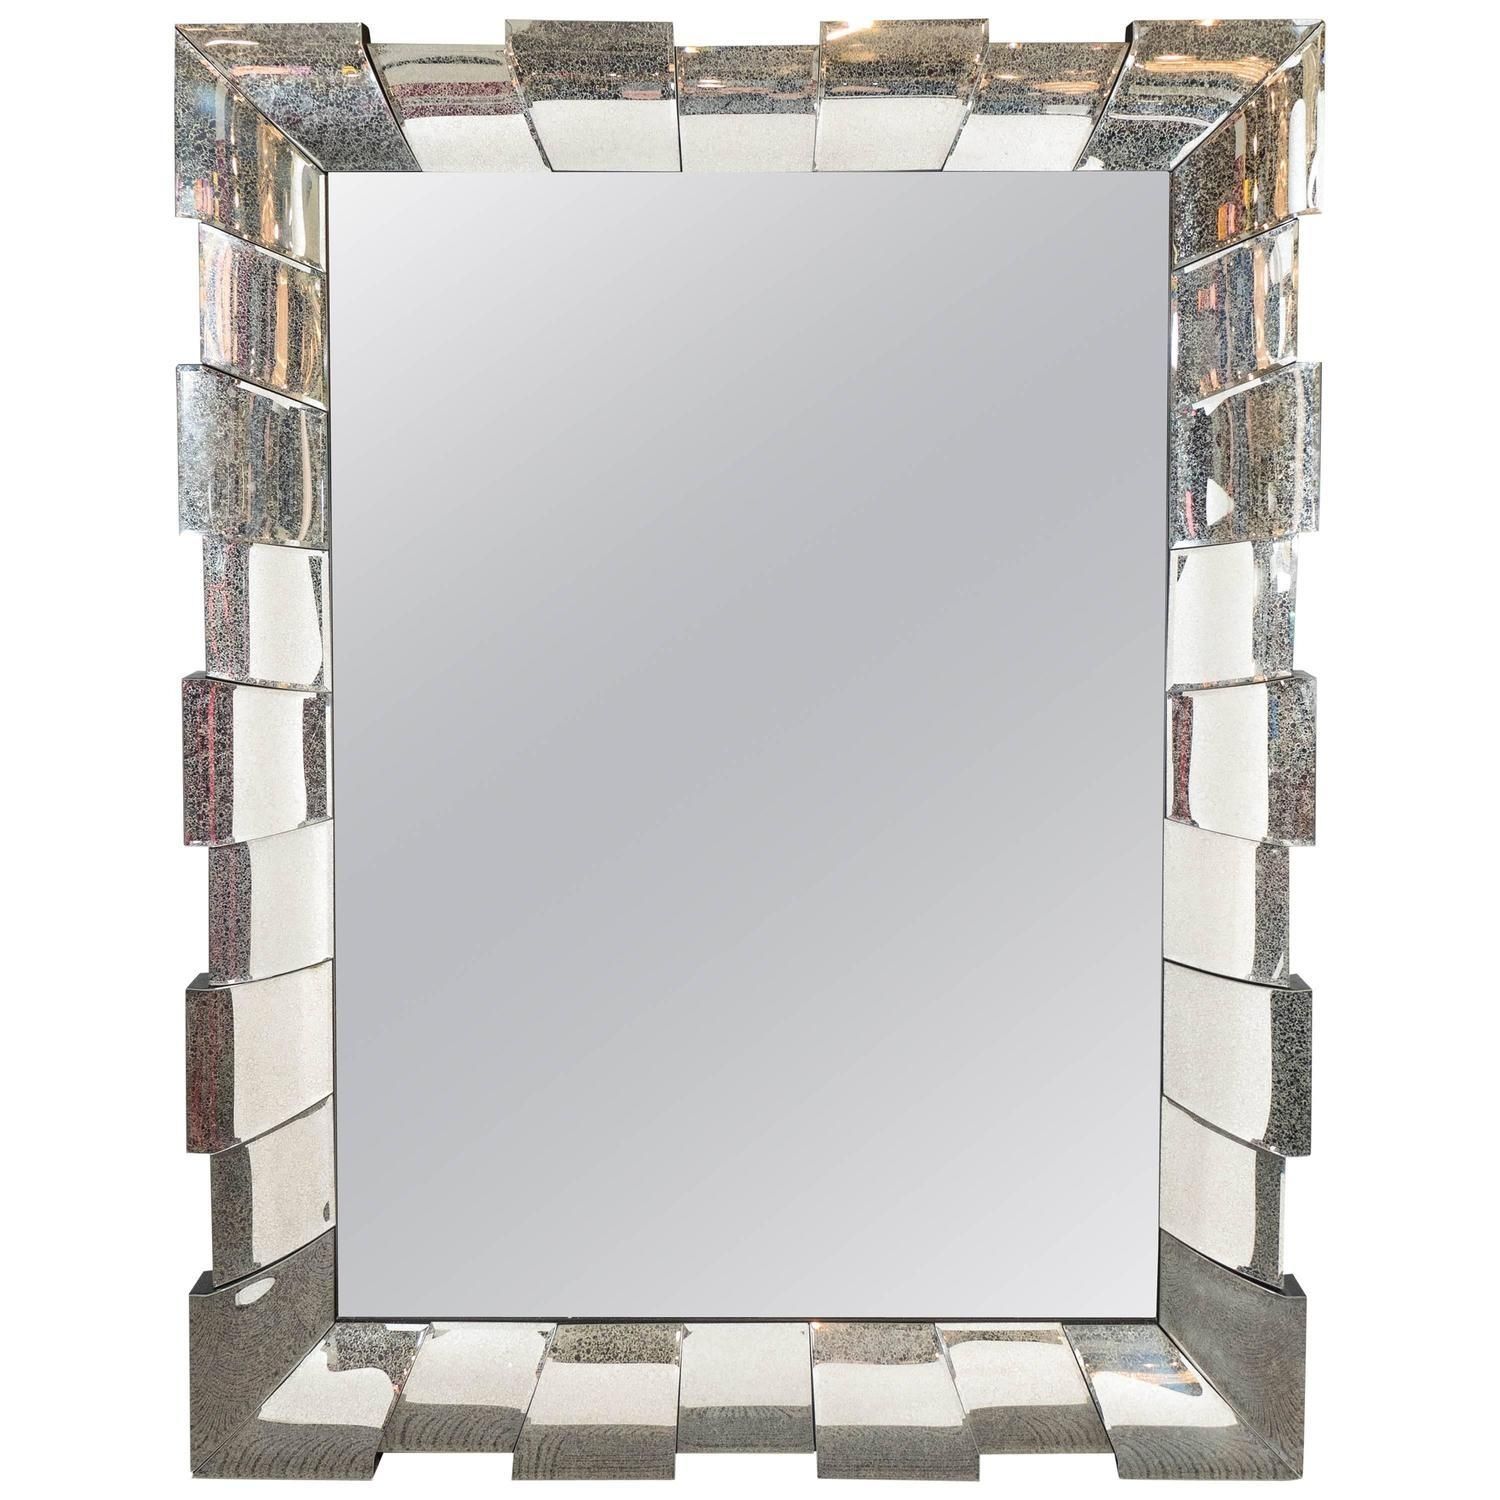 Home Decor : Large Rectangular Wall Mirror Copper Pendant Light Throughout Small Free Standing Mirror (View 18 of 20)